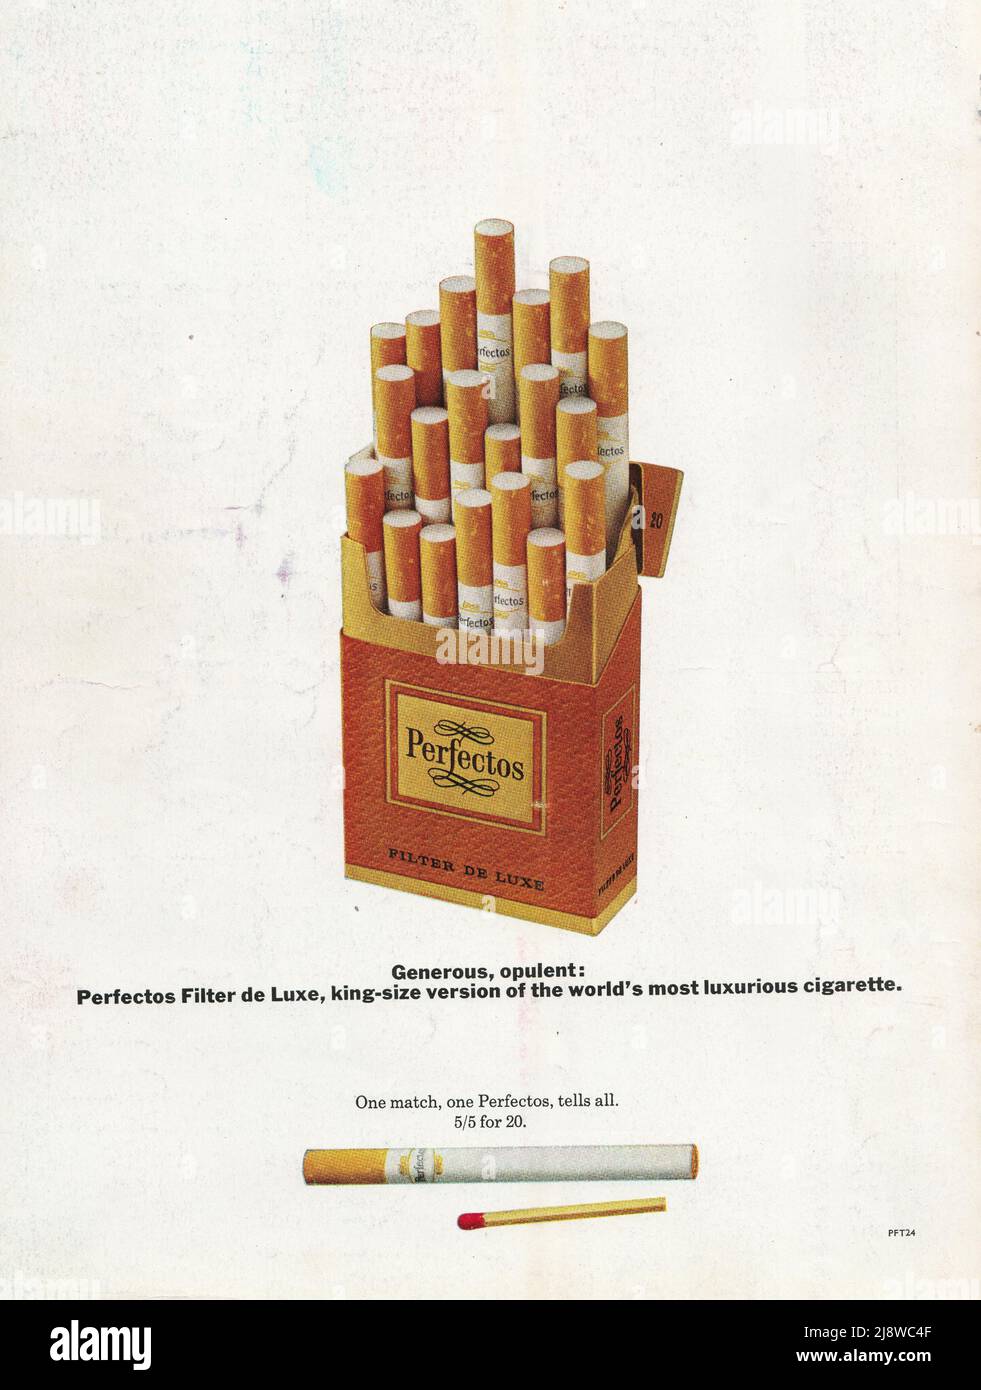 Perfectos cigarettes packet of cigarettes vintage paper advertisement advert ad 1970s Stock Photo